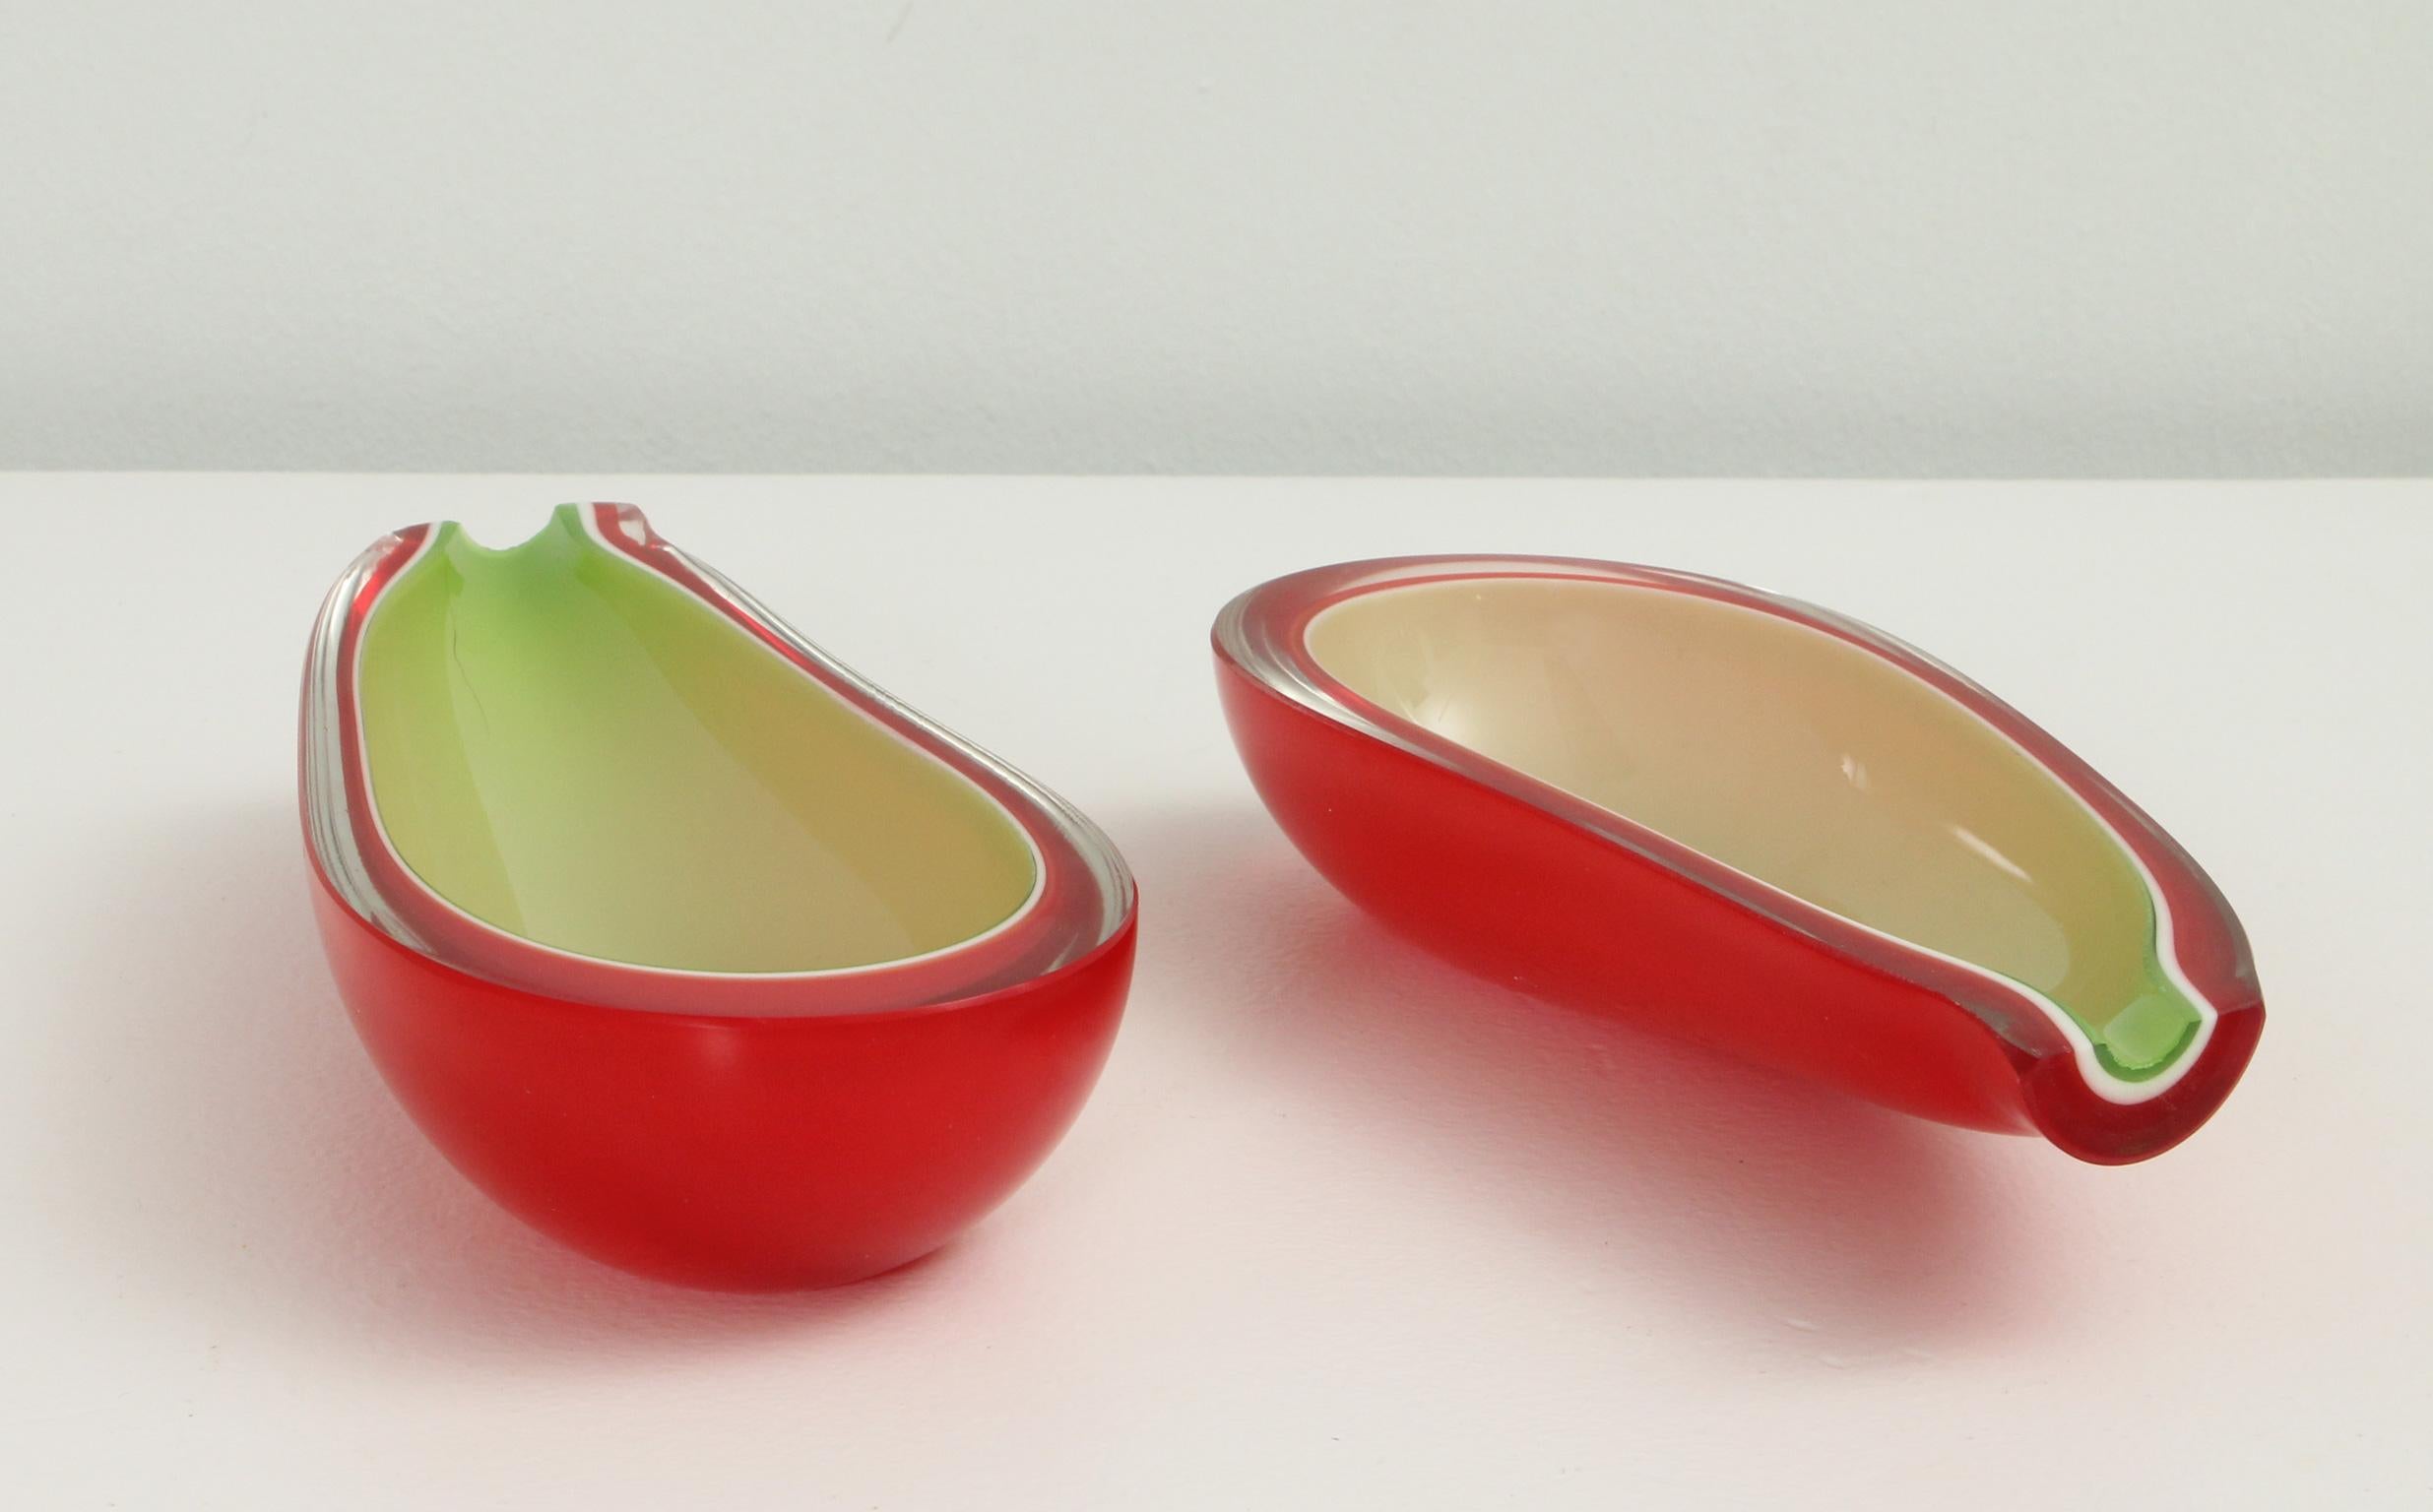 Mid-Century Modern Pair of Fratelli Toso Eggplant Bowls, 1950's For Sale